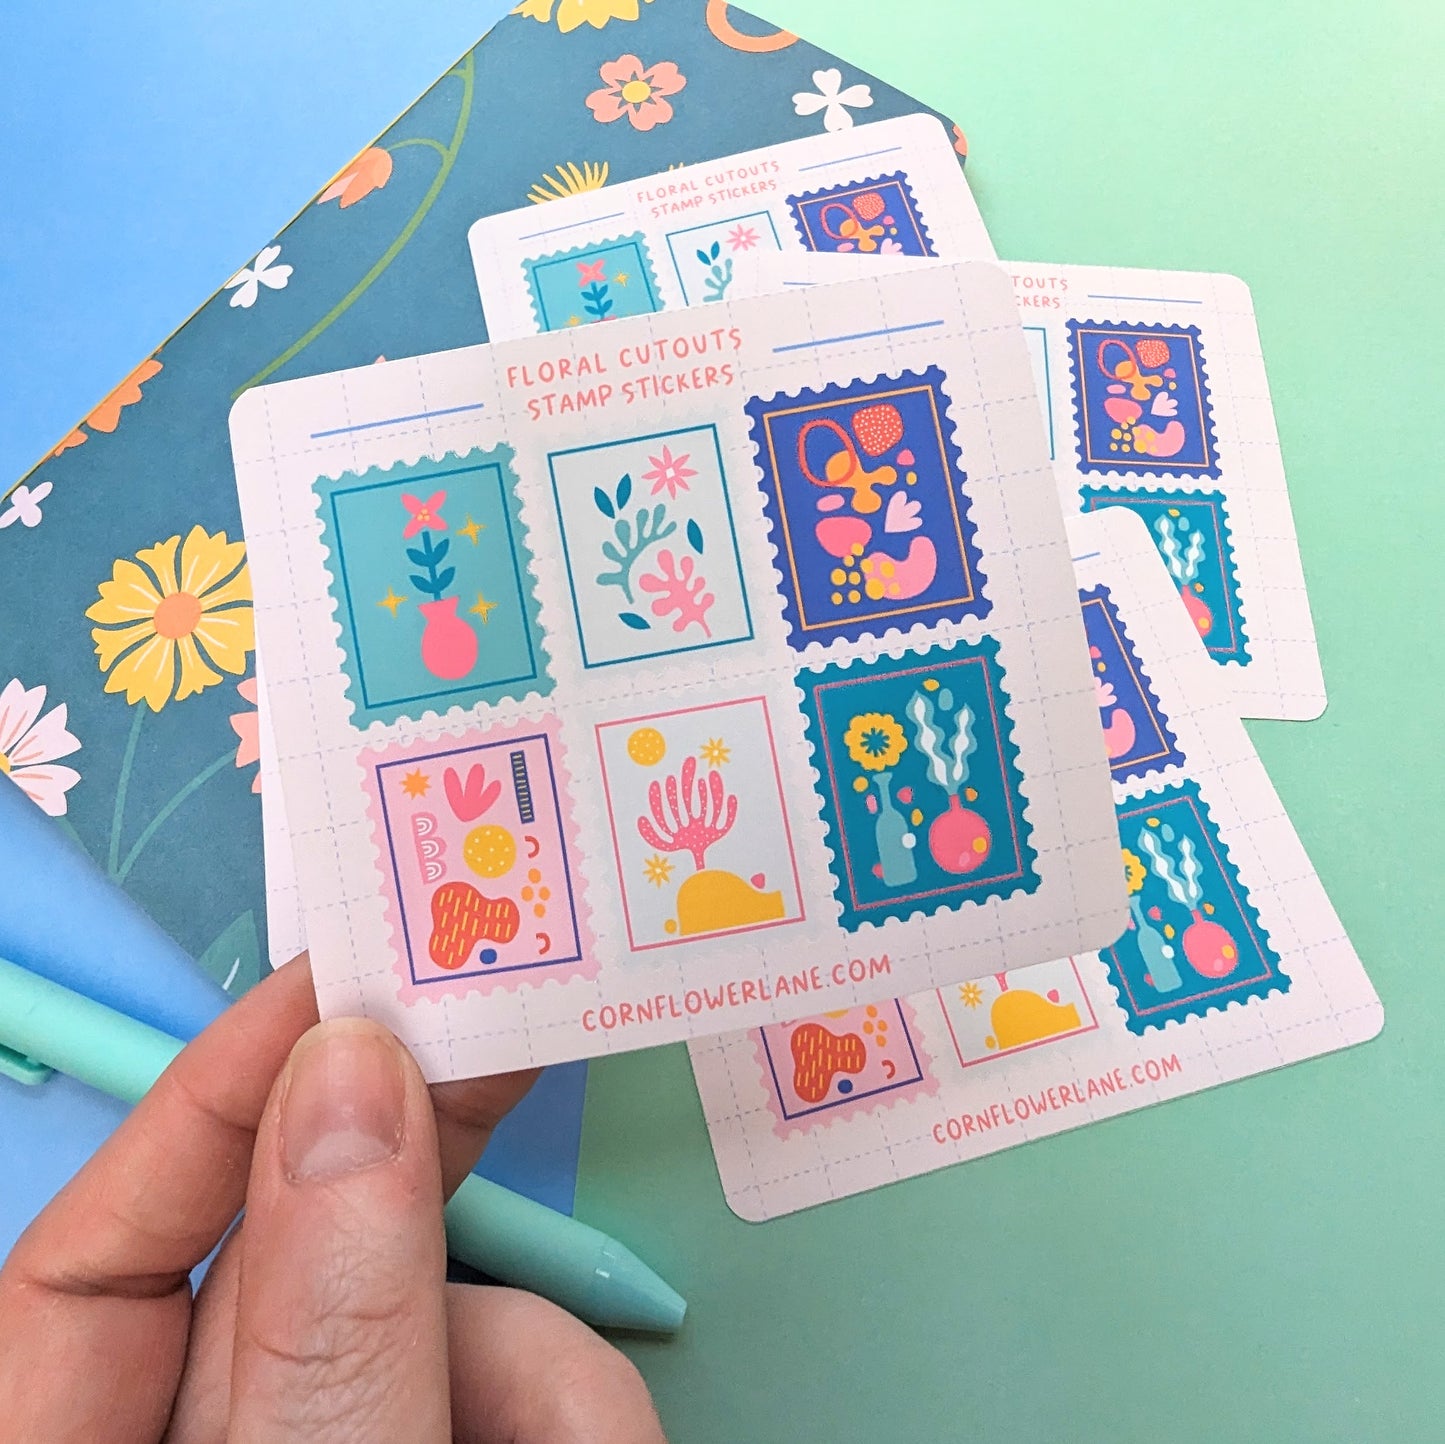 Floral Cutouts Stamp Stickers